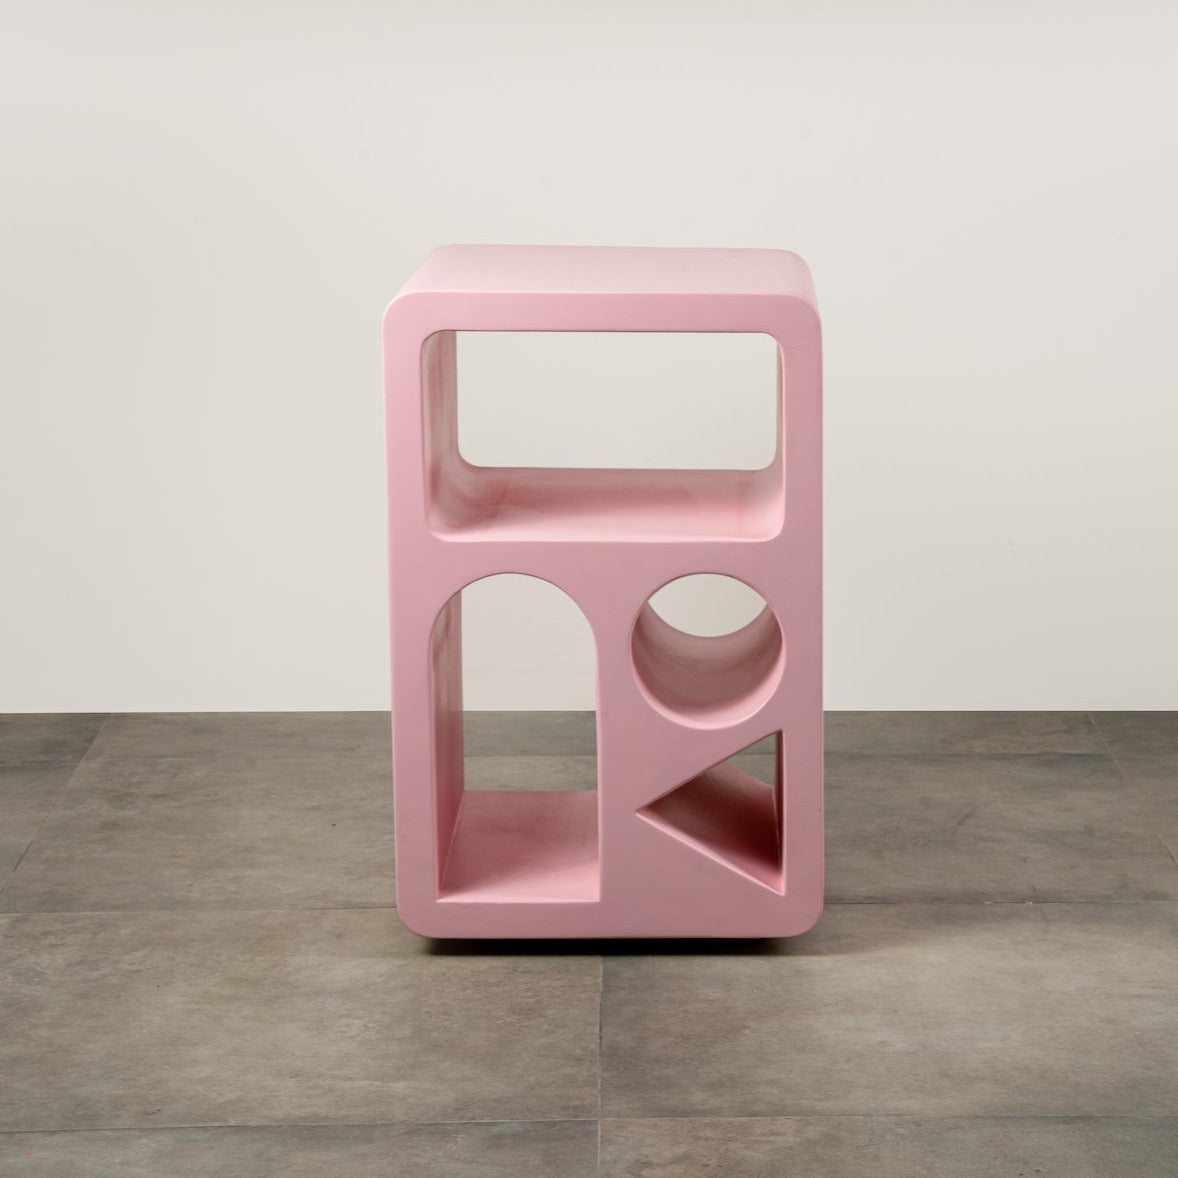 Toy Side Table (Lifesize) by Amrit Pal Singh